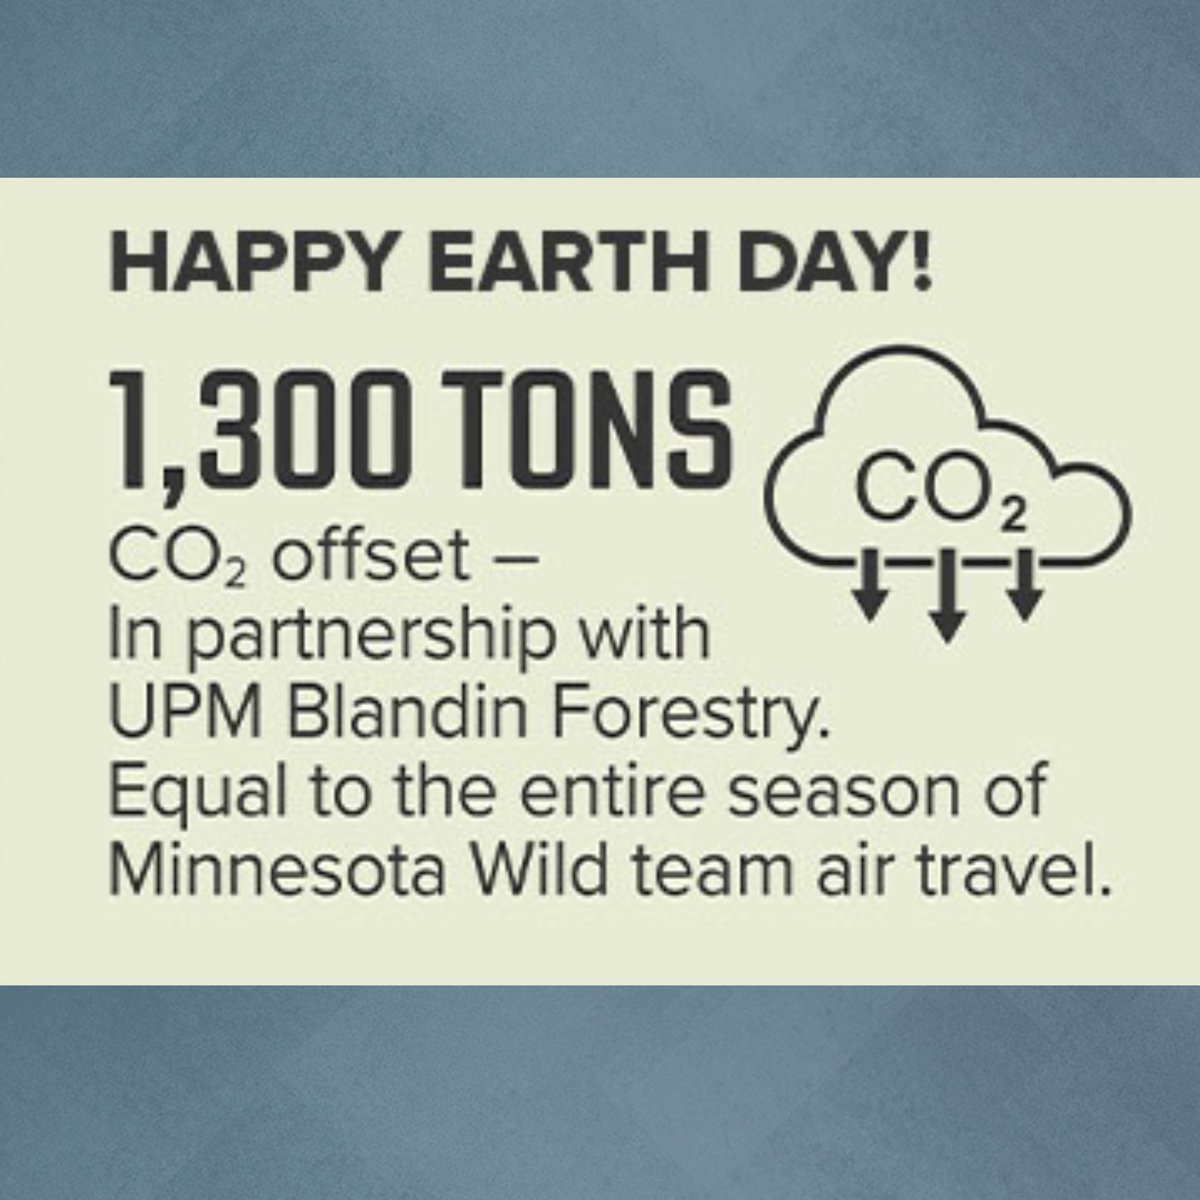 Did you know that we offset 1,300 tons of carbon dioxide in partnership with UPM Blandin Forestry, which is equal to the entire season of @mnwild team air travel ♻️✈️